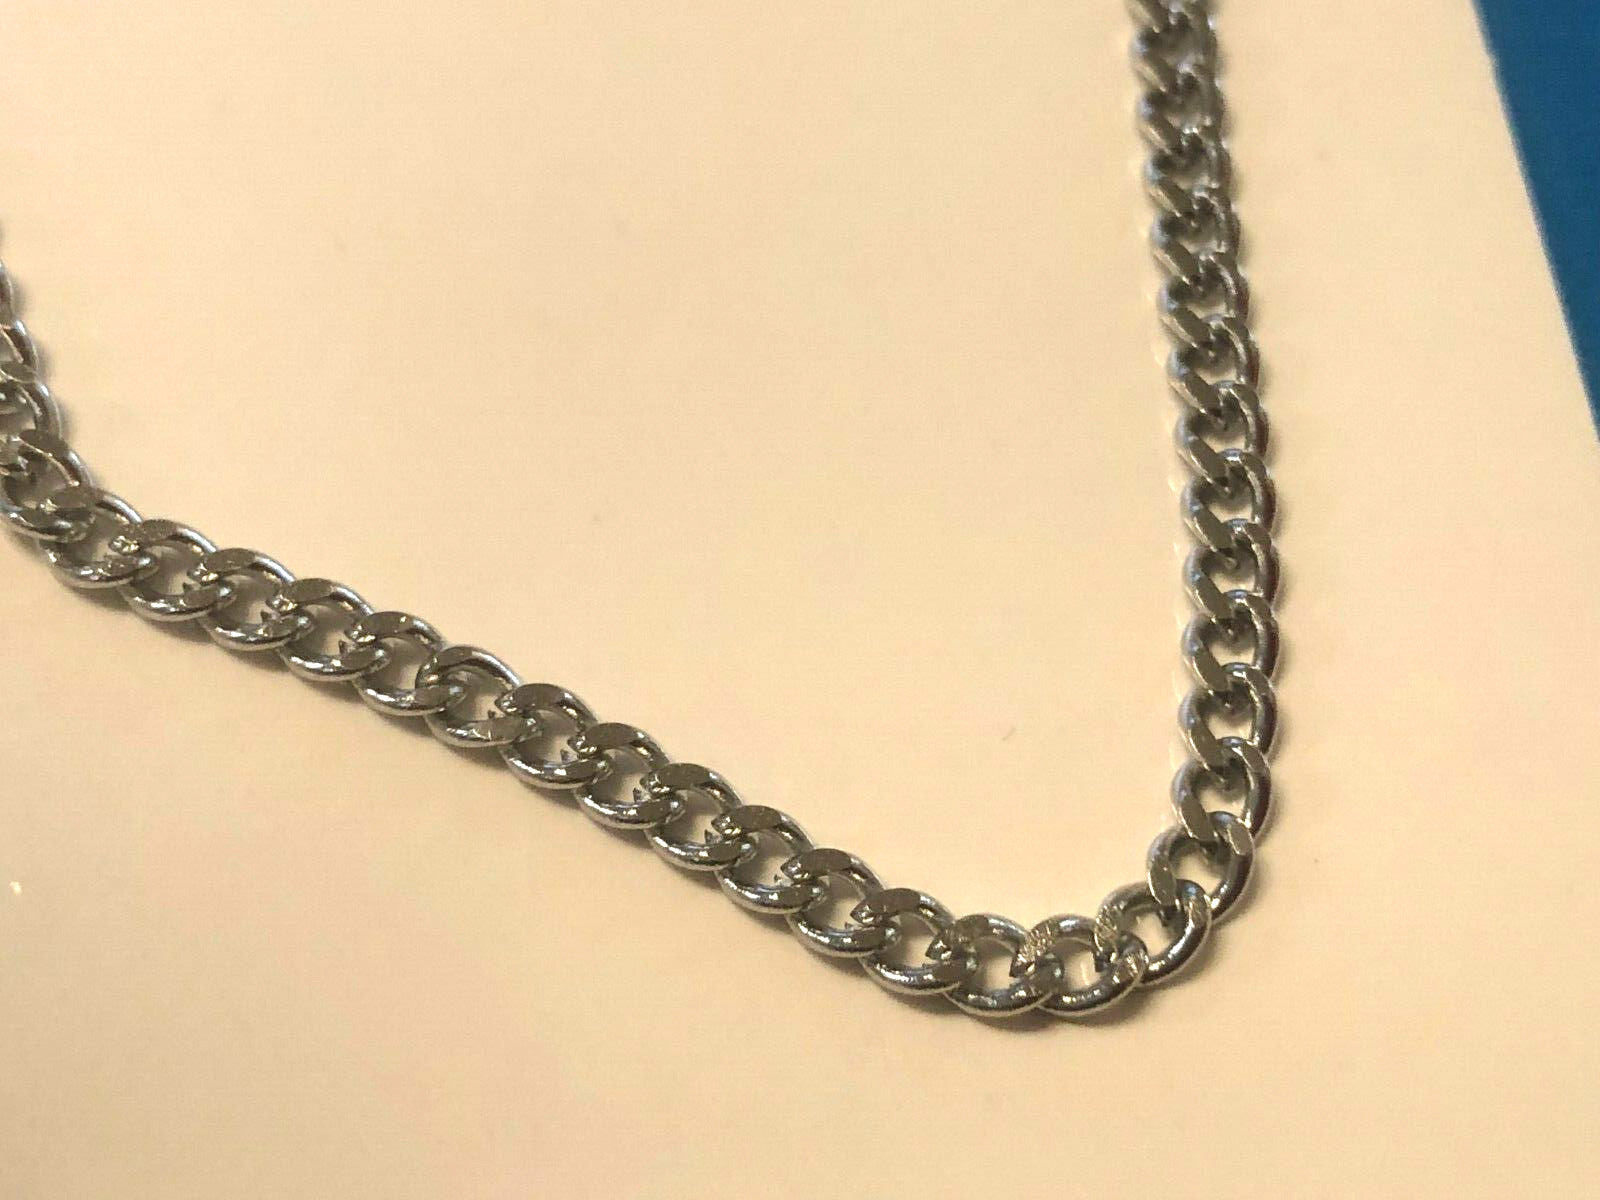 24" Curb Stainless Steel Chain, New - Bob and Penny Lord